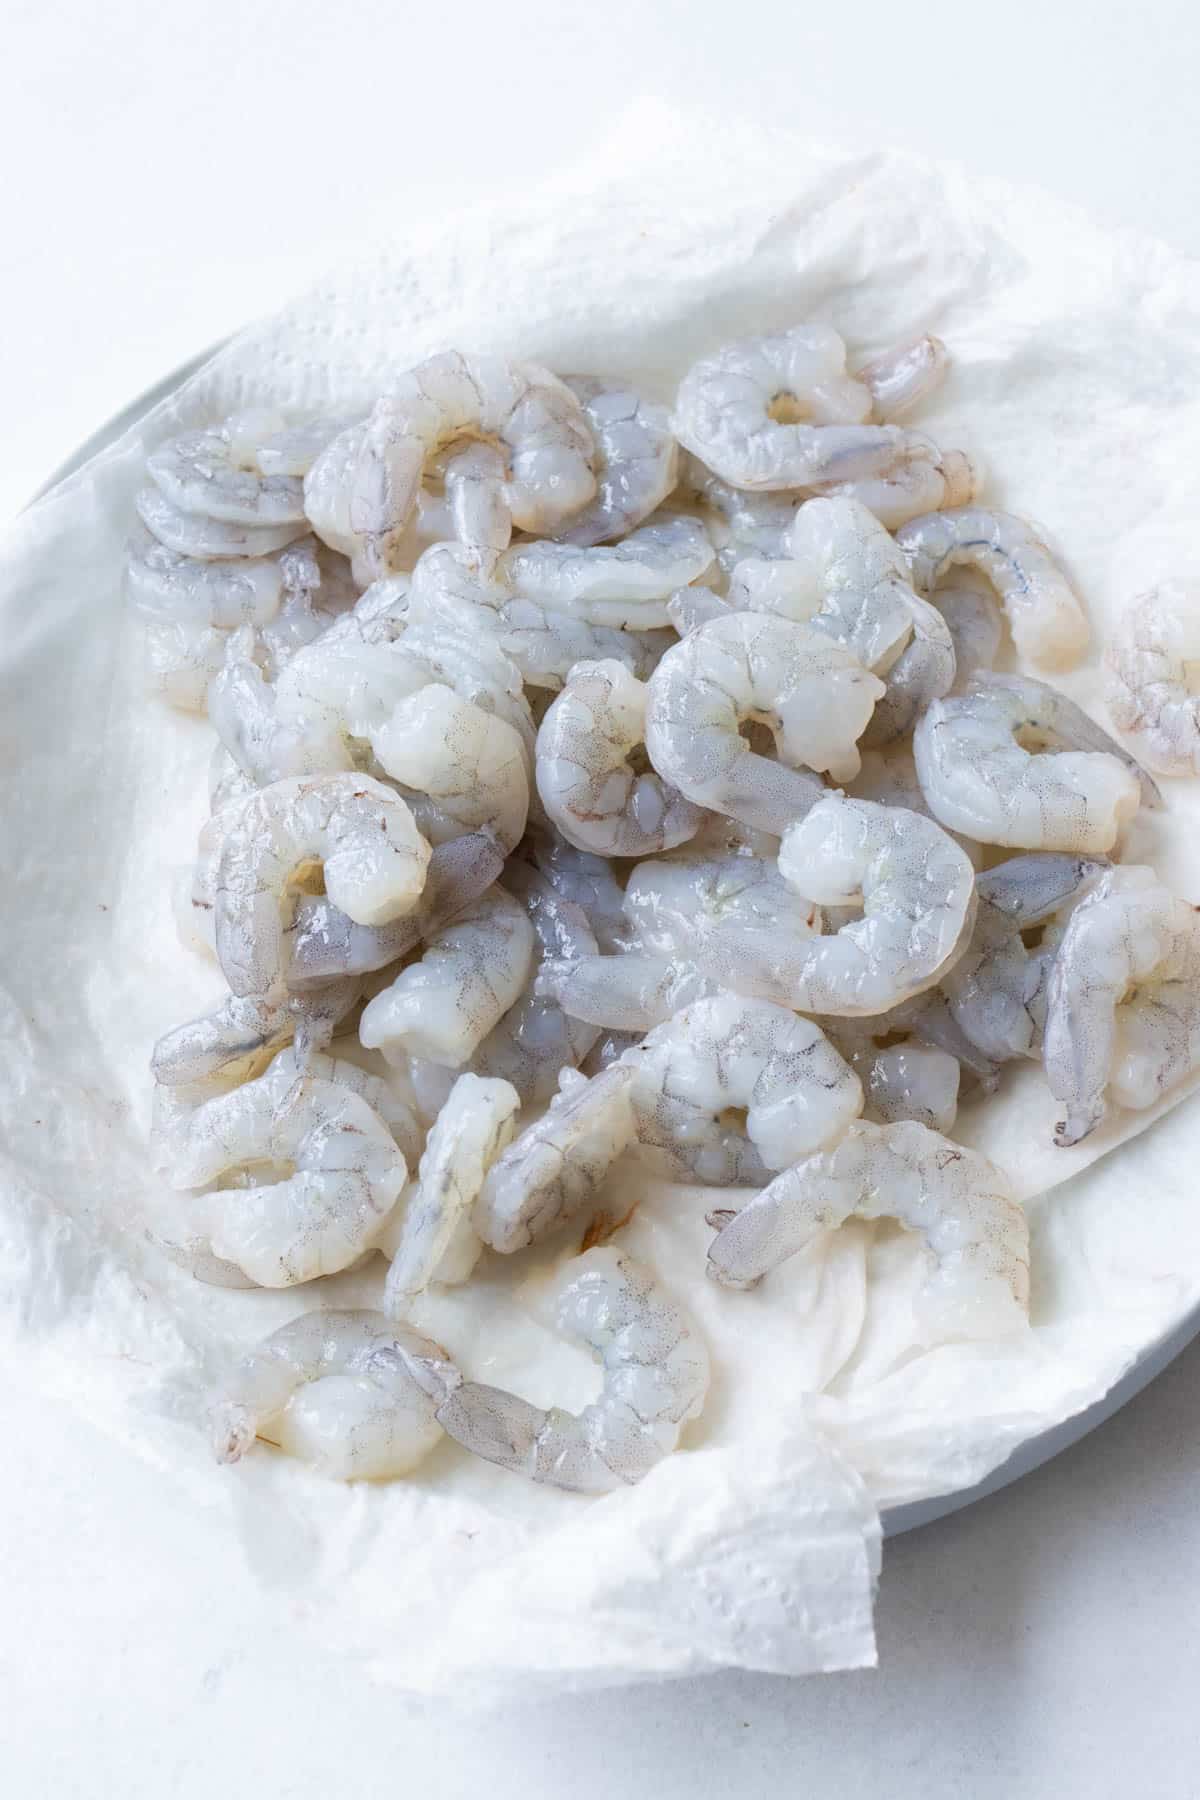 Shrimp is dried off before being added to the batter.